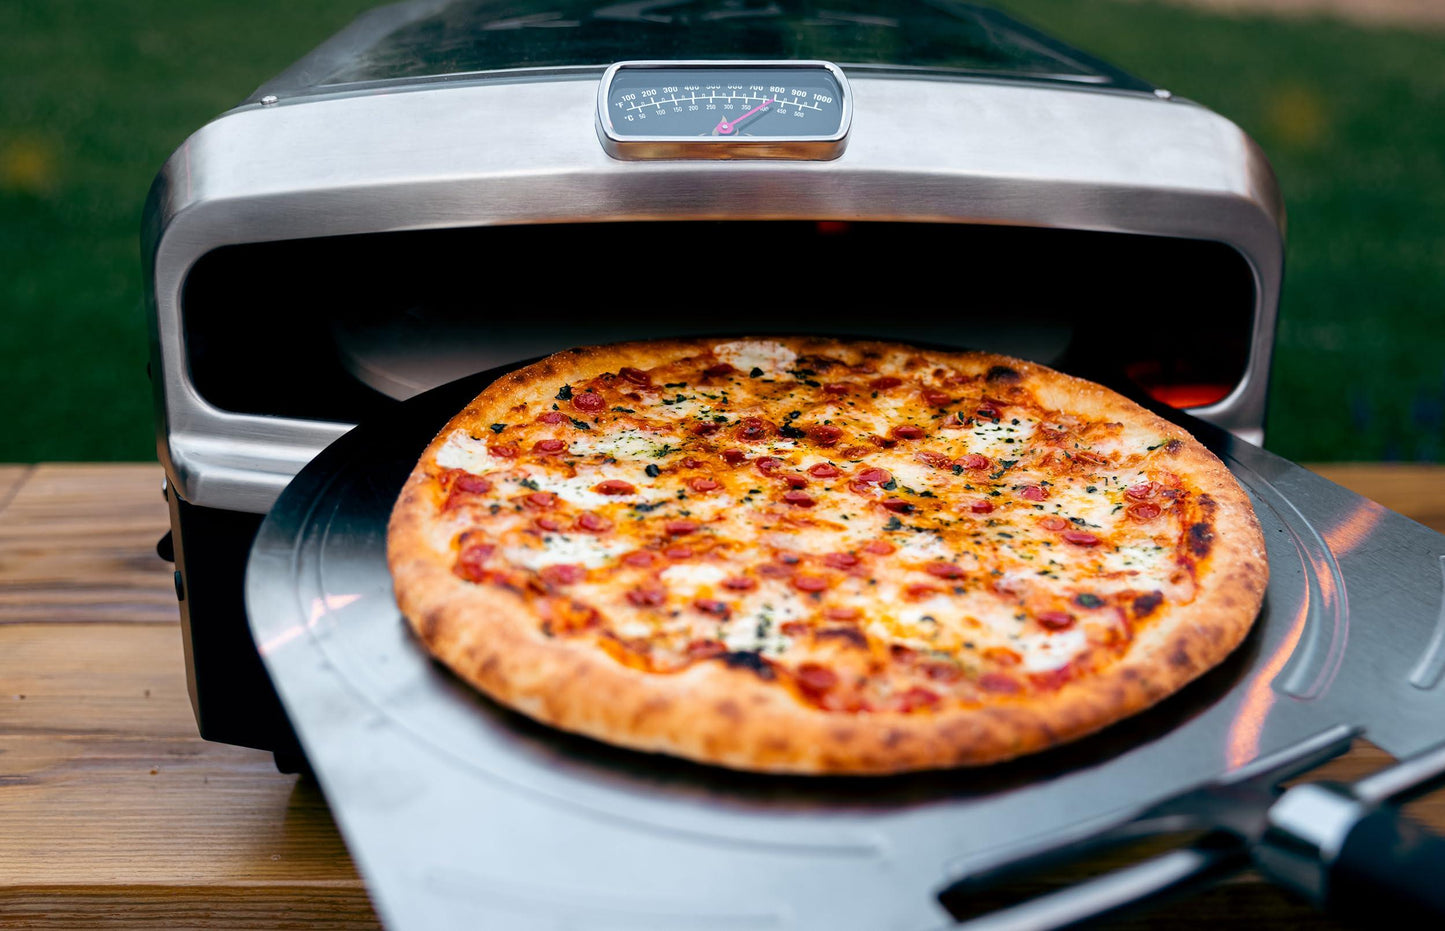 Halo Versa 16 Propane Gas Outdoor Pizza Oven with Rotating Cooking Stone | Portable Appliance for all Outdoor Kitchens - CookCave